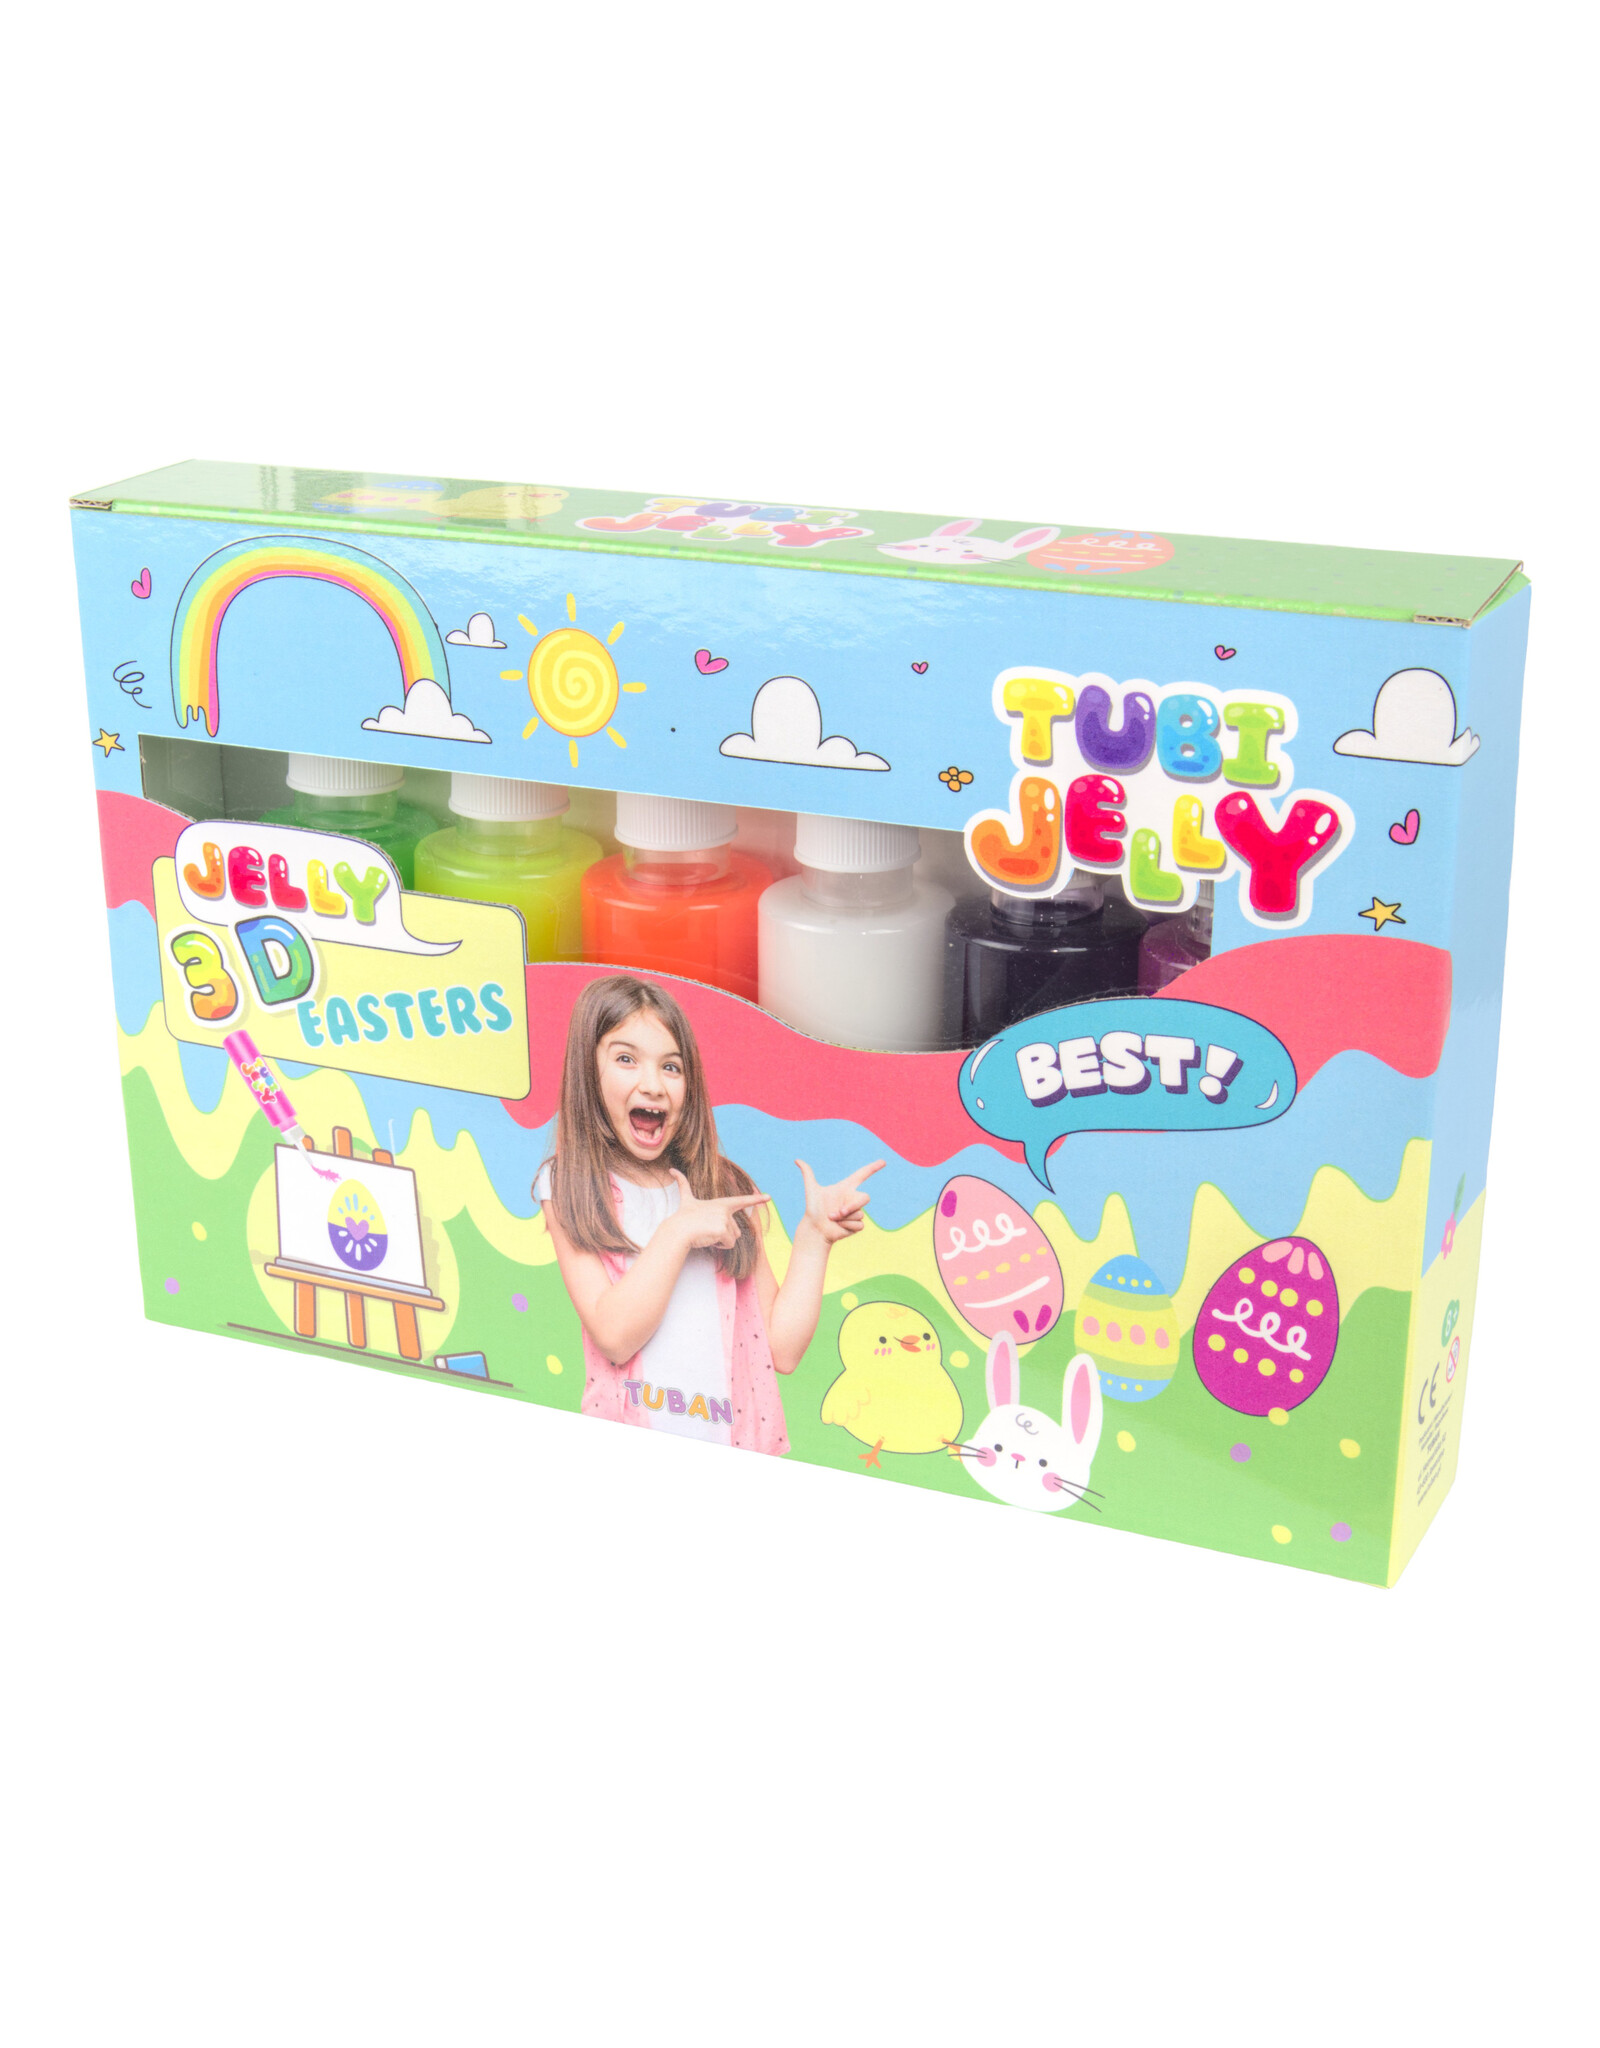 Tuban Tuban - Tubi Jelly set with 6 Colors – Easters